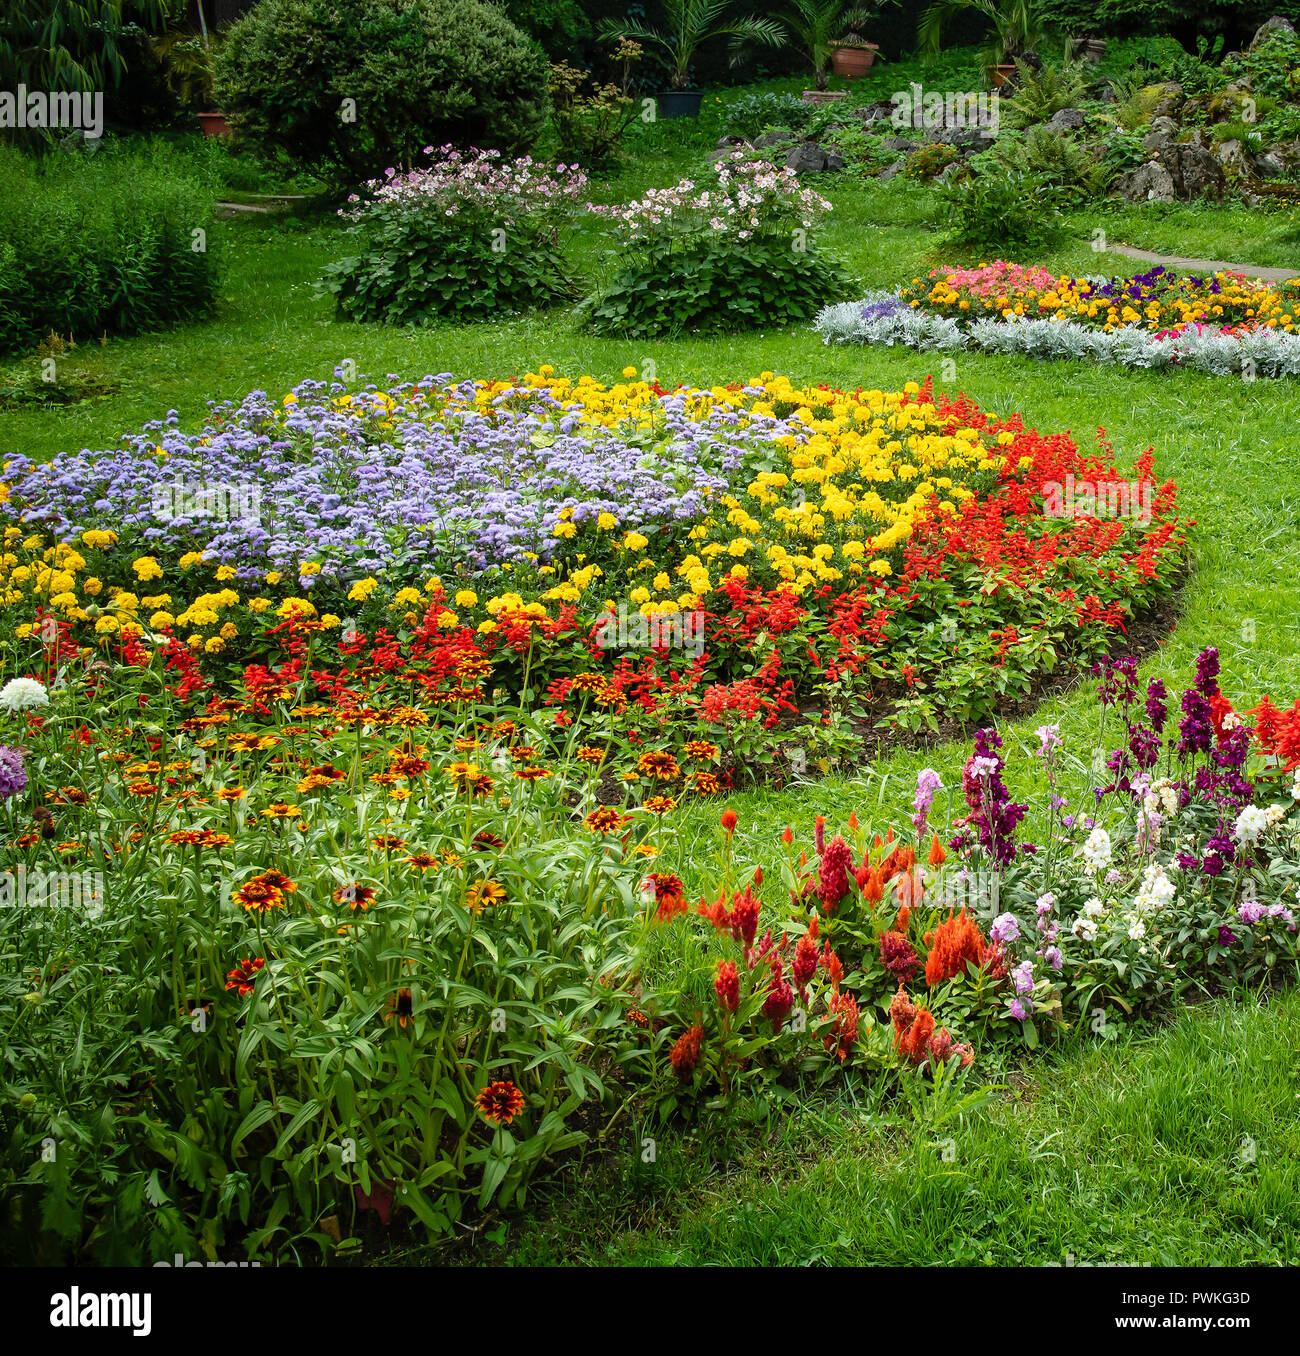 A garden full of flowers in various colors and shapes Stock Photo